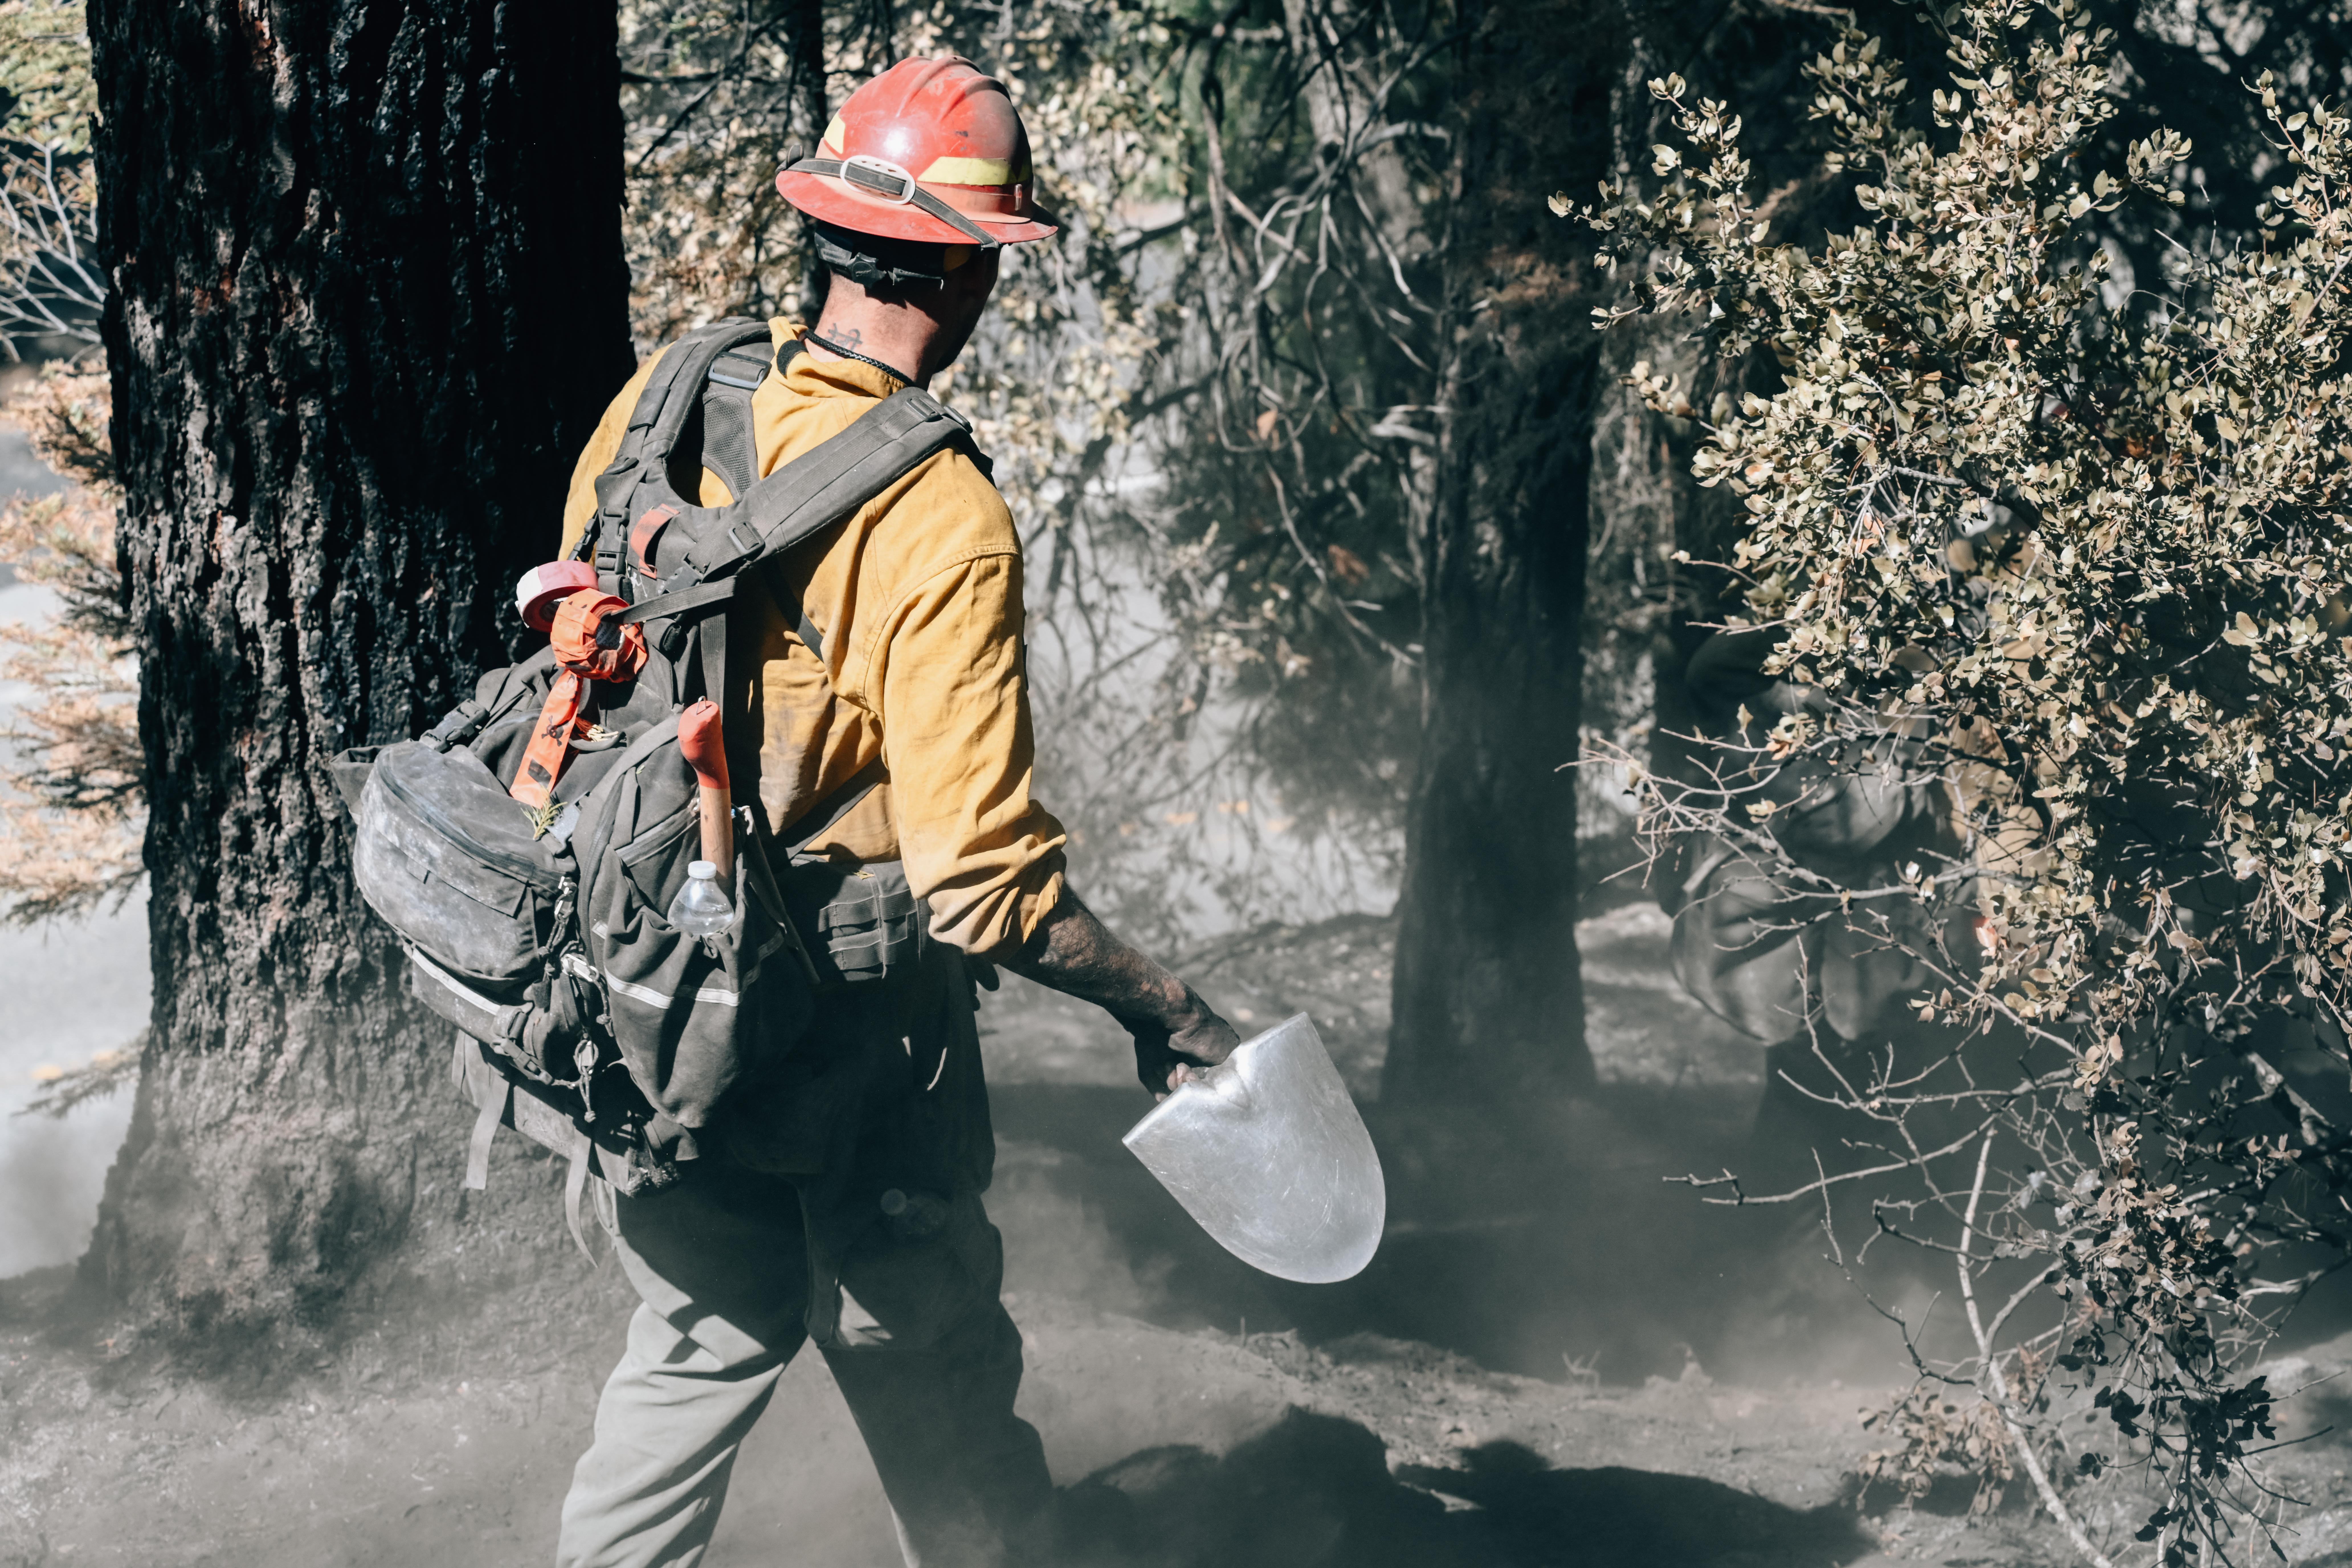 Crews with Bella Wildfire and Forestry work along Wawona Road, July 24, 2022, in Yosemite National Park performing suppression repair operations due to the Washburn Fire. Photo by Benjamin Cossel, USFS